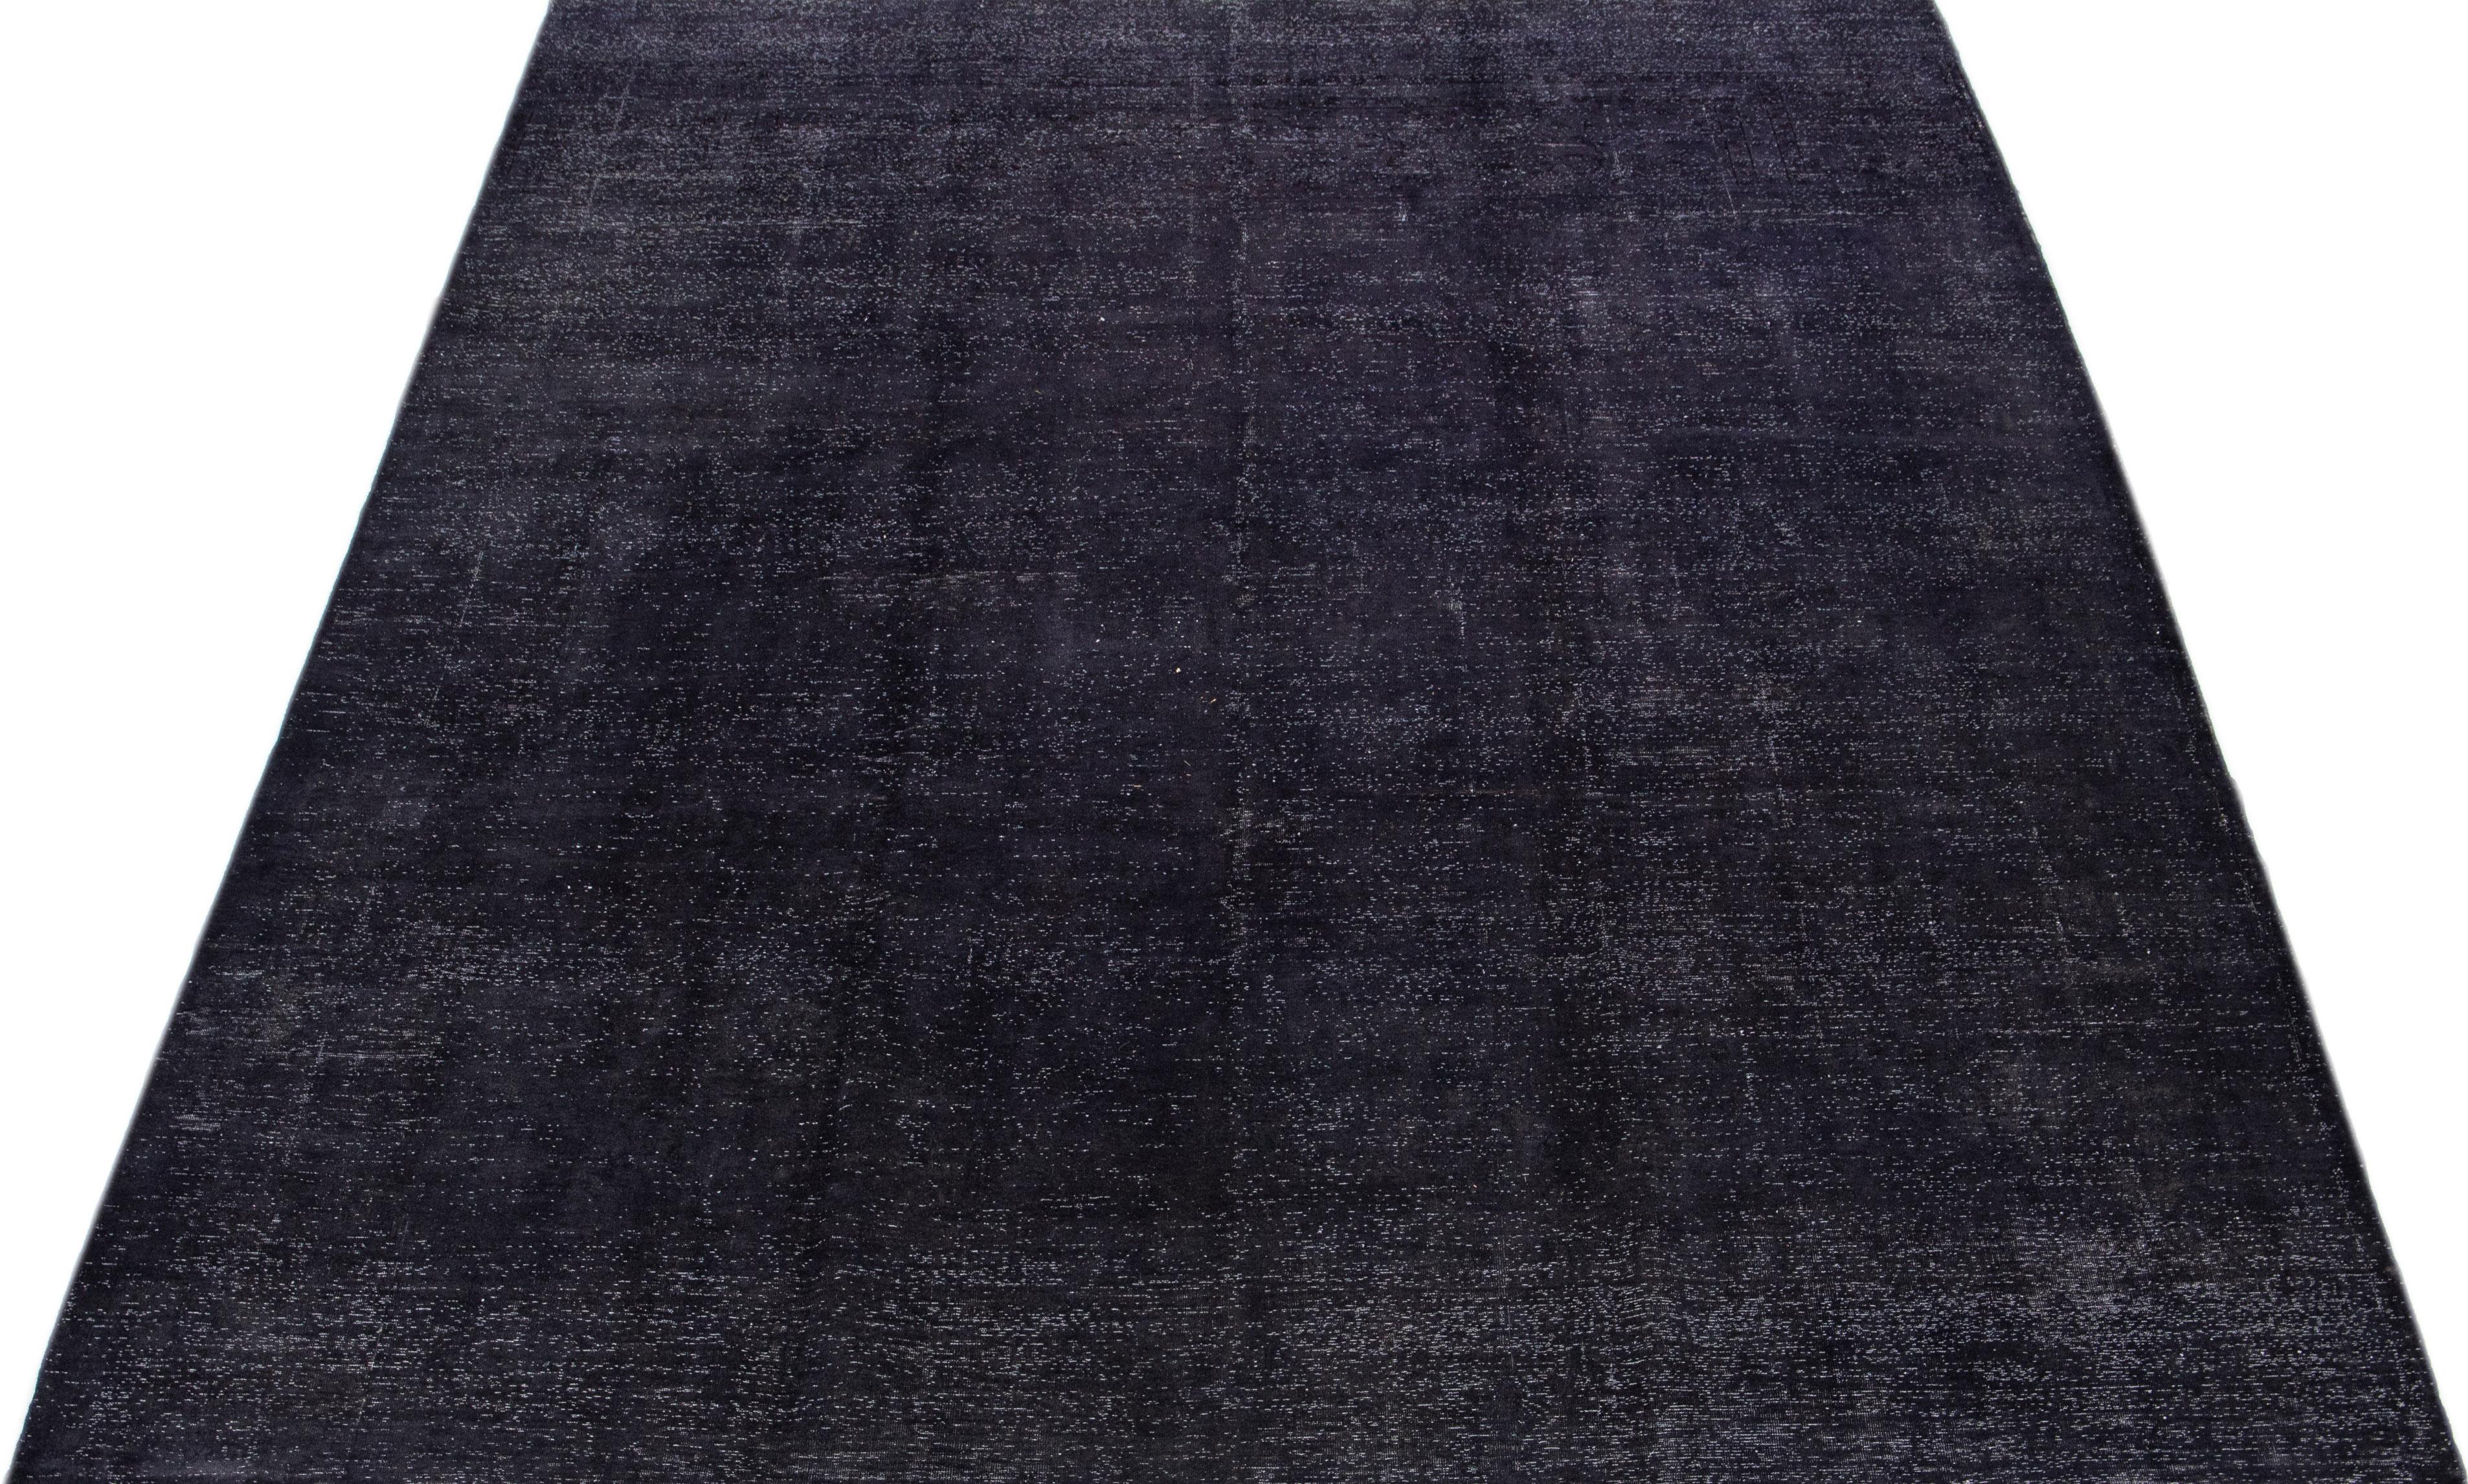 Beautiful Vintage Overdyed hand-knotted wool rug with a gray-charcoal color field with an allover motif. This carefully crafted rug provides long-lasting durability and a stylish look that can elevate any room.

This rug measures: 9'7